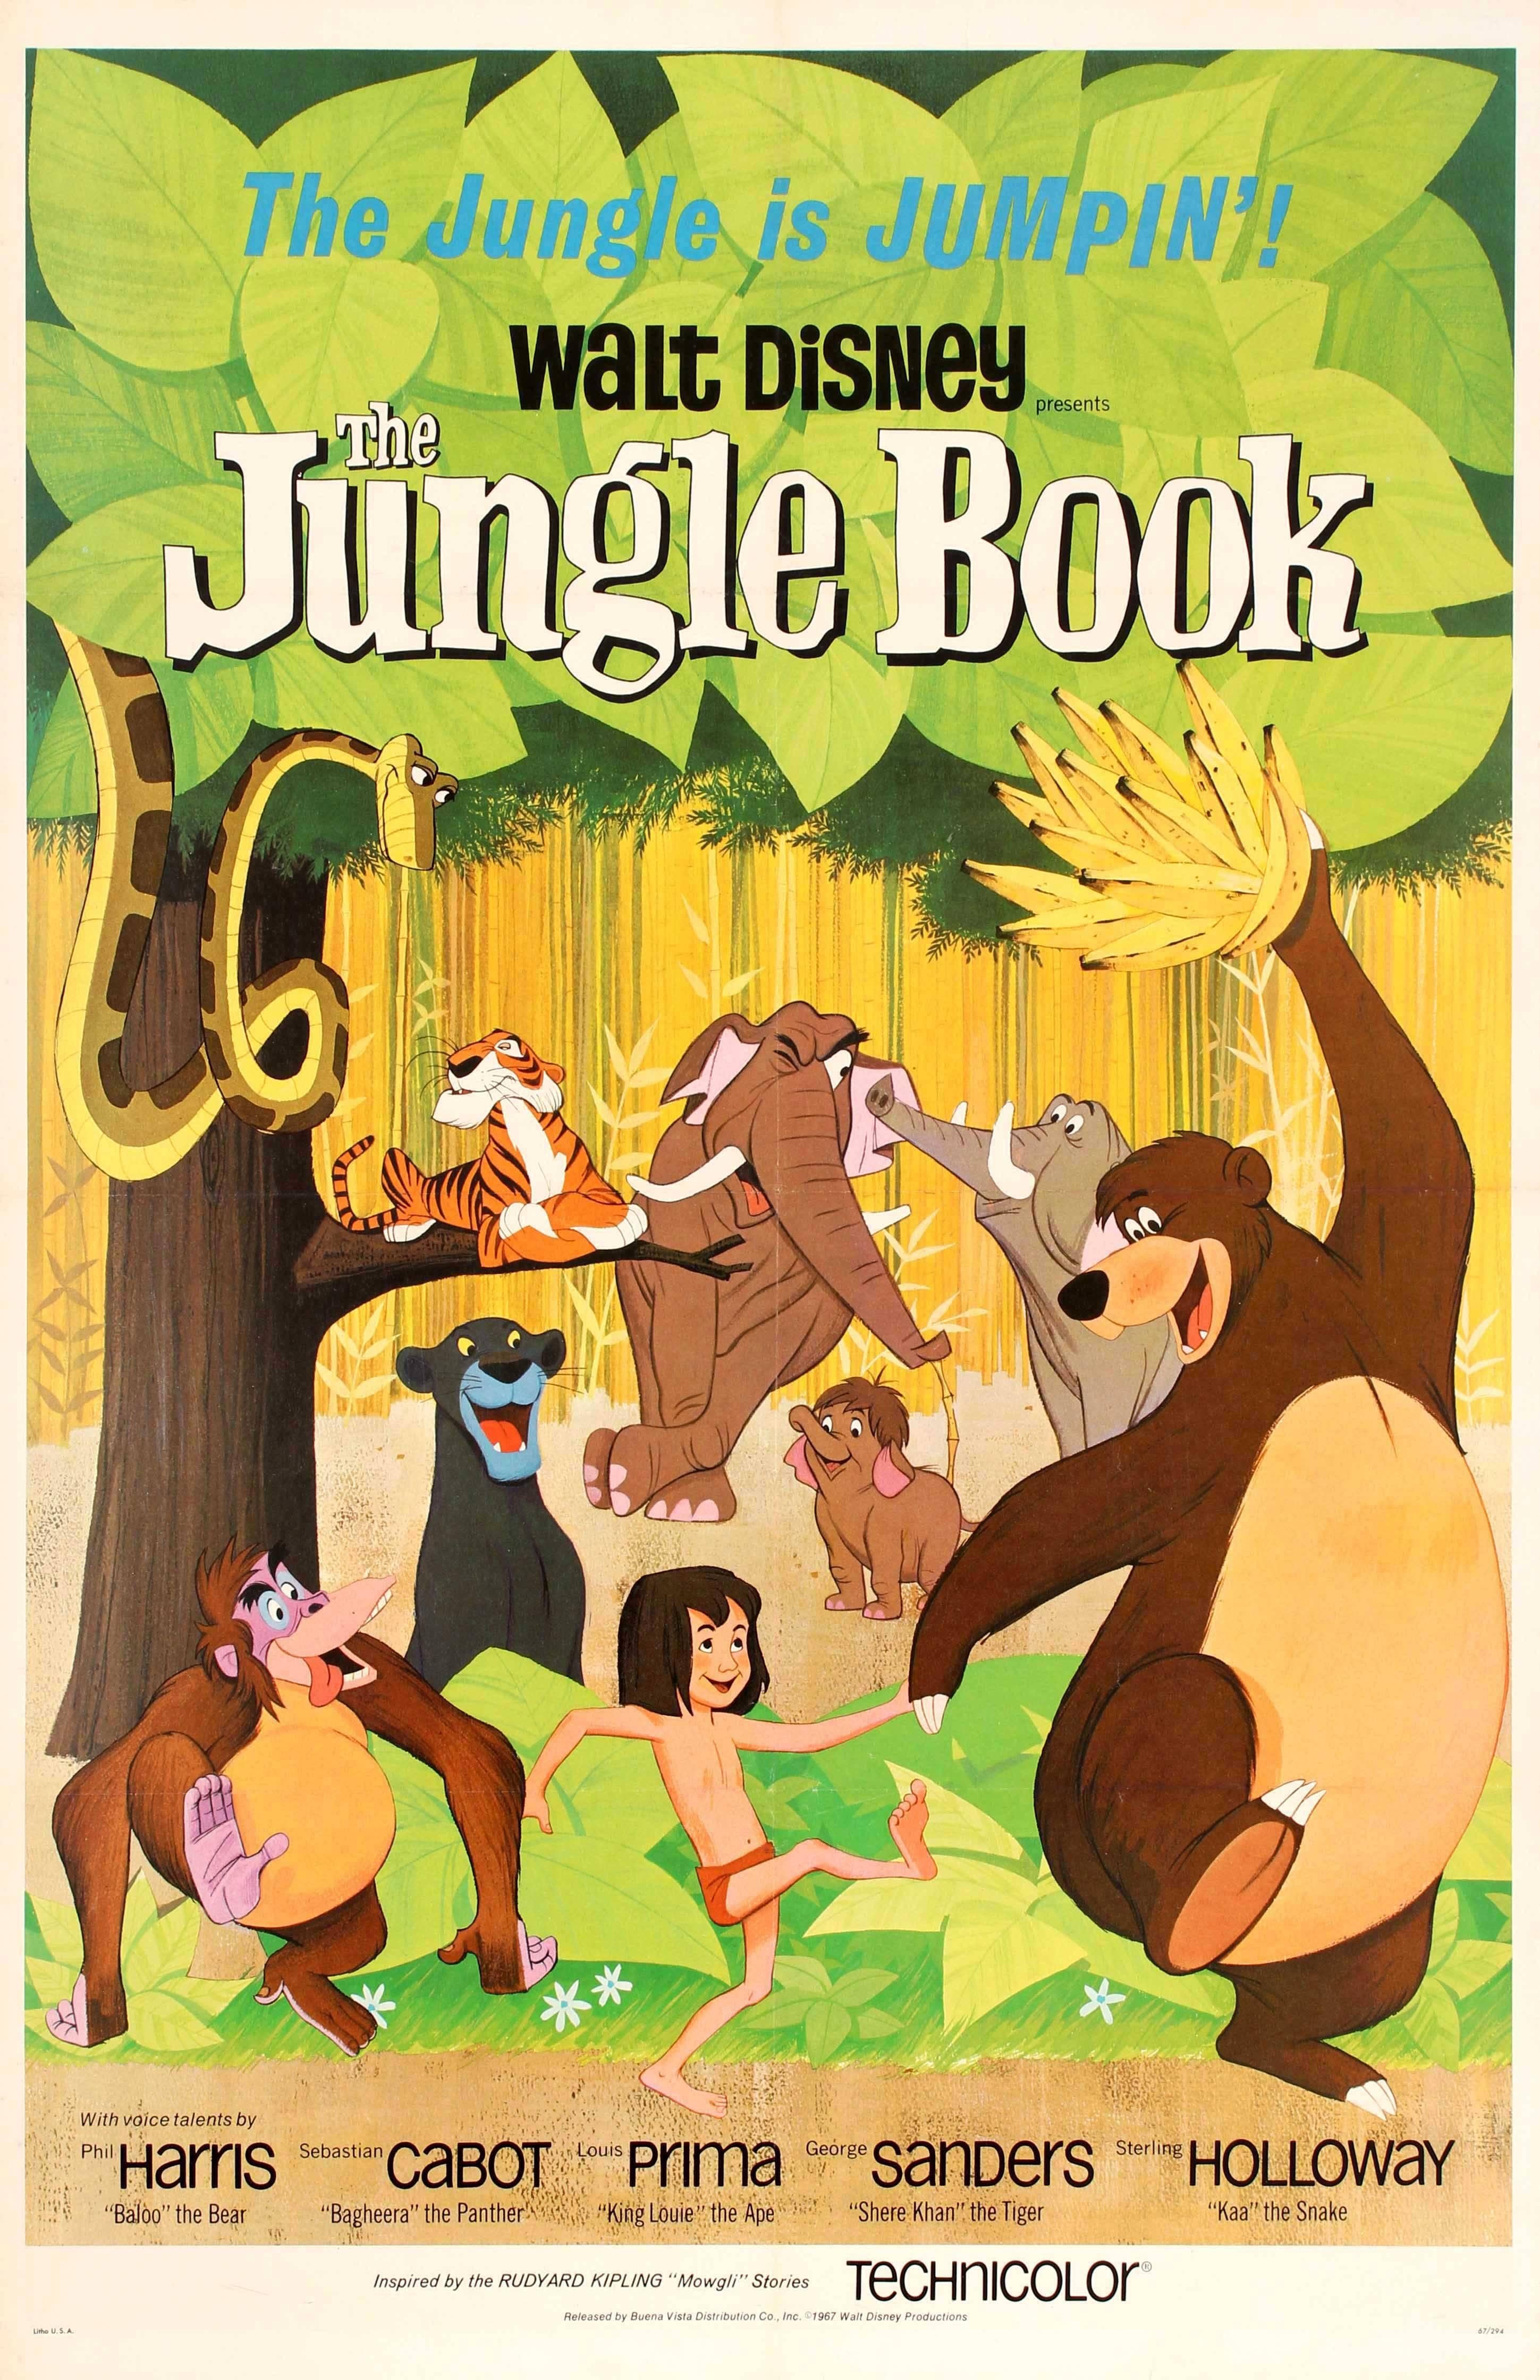 Unknown Print - Original Vintage Walt Disney Movie Poster For The Family Classic The Jungle Book